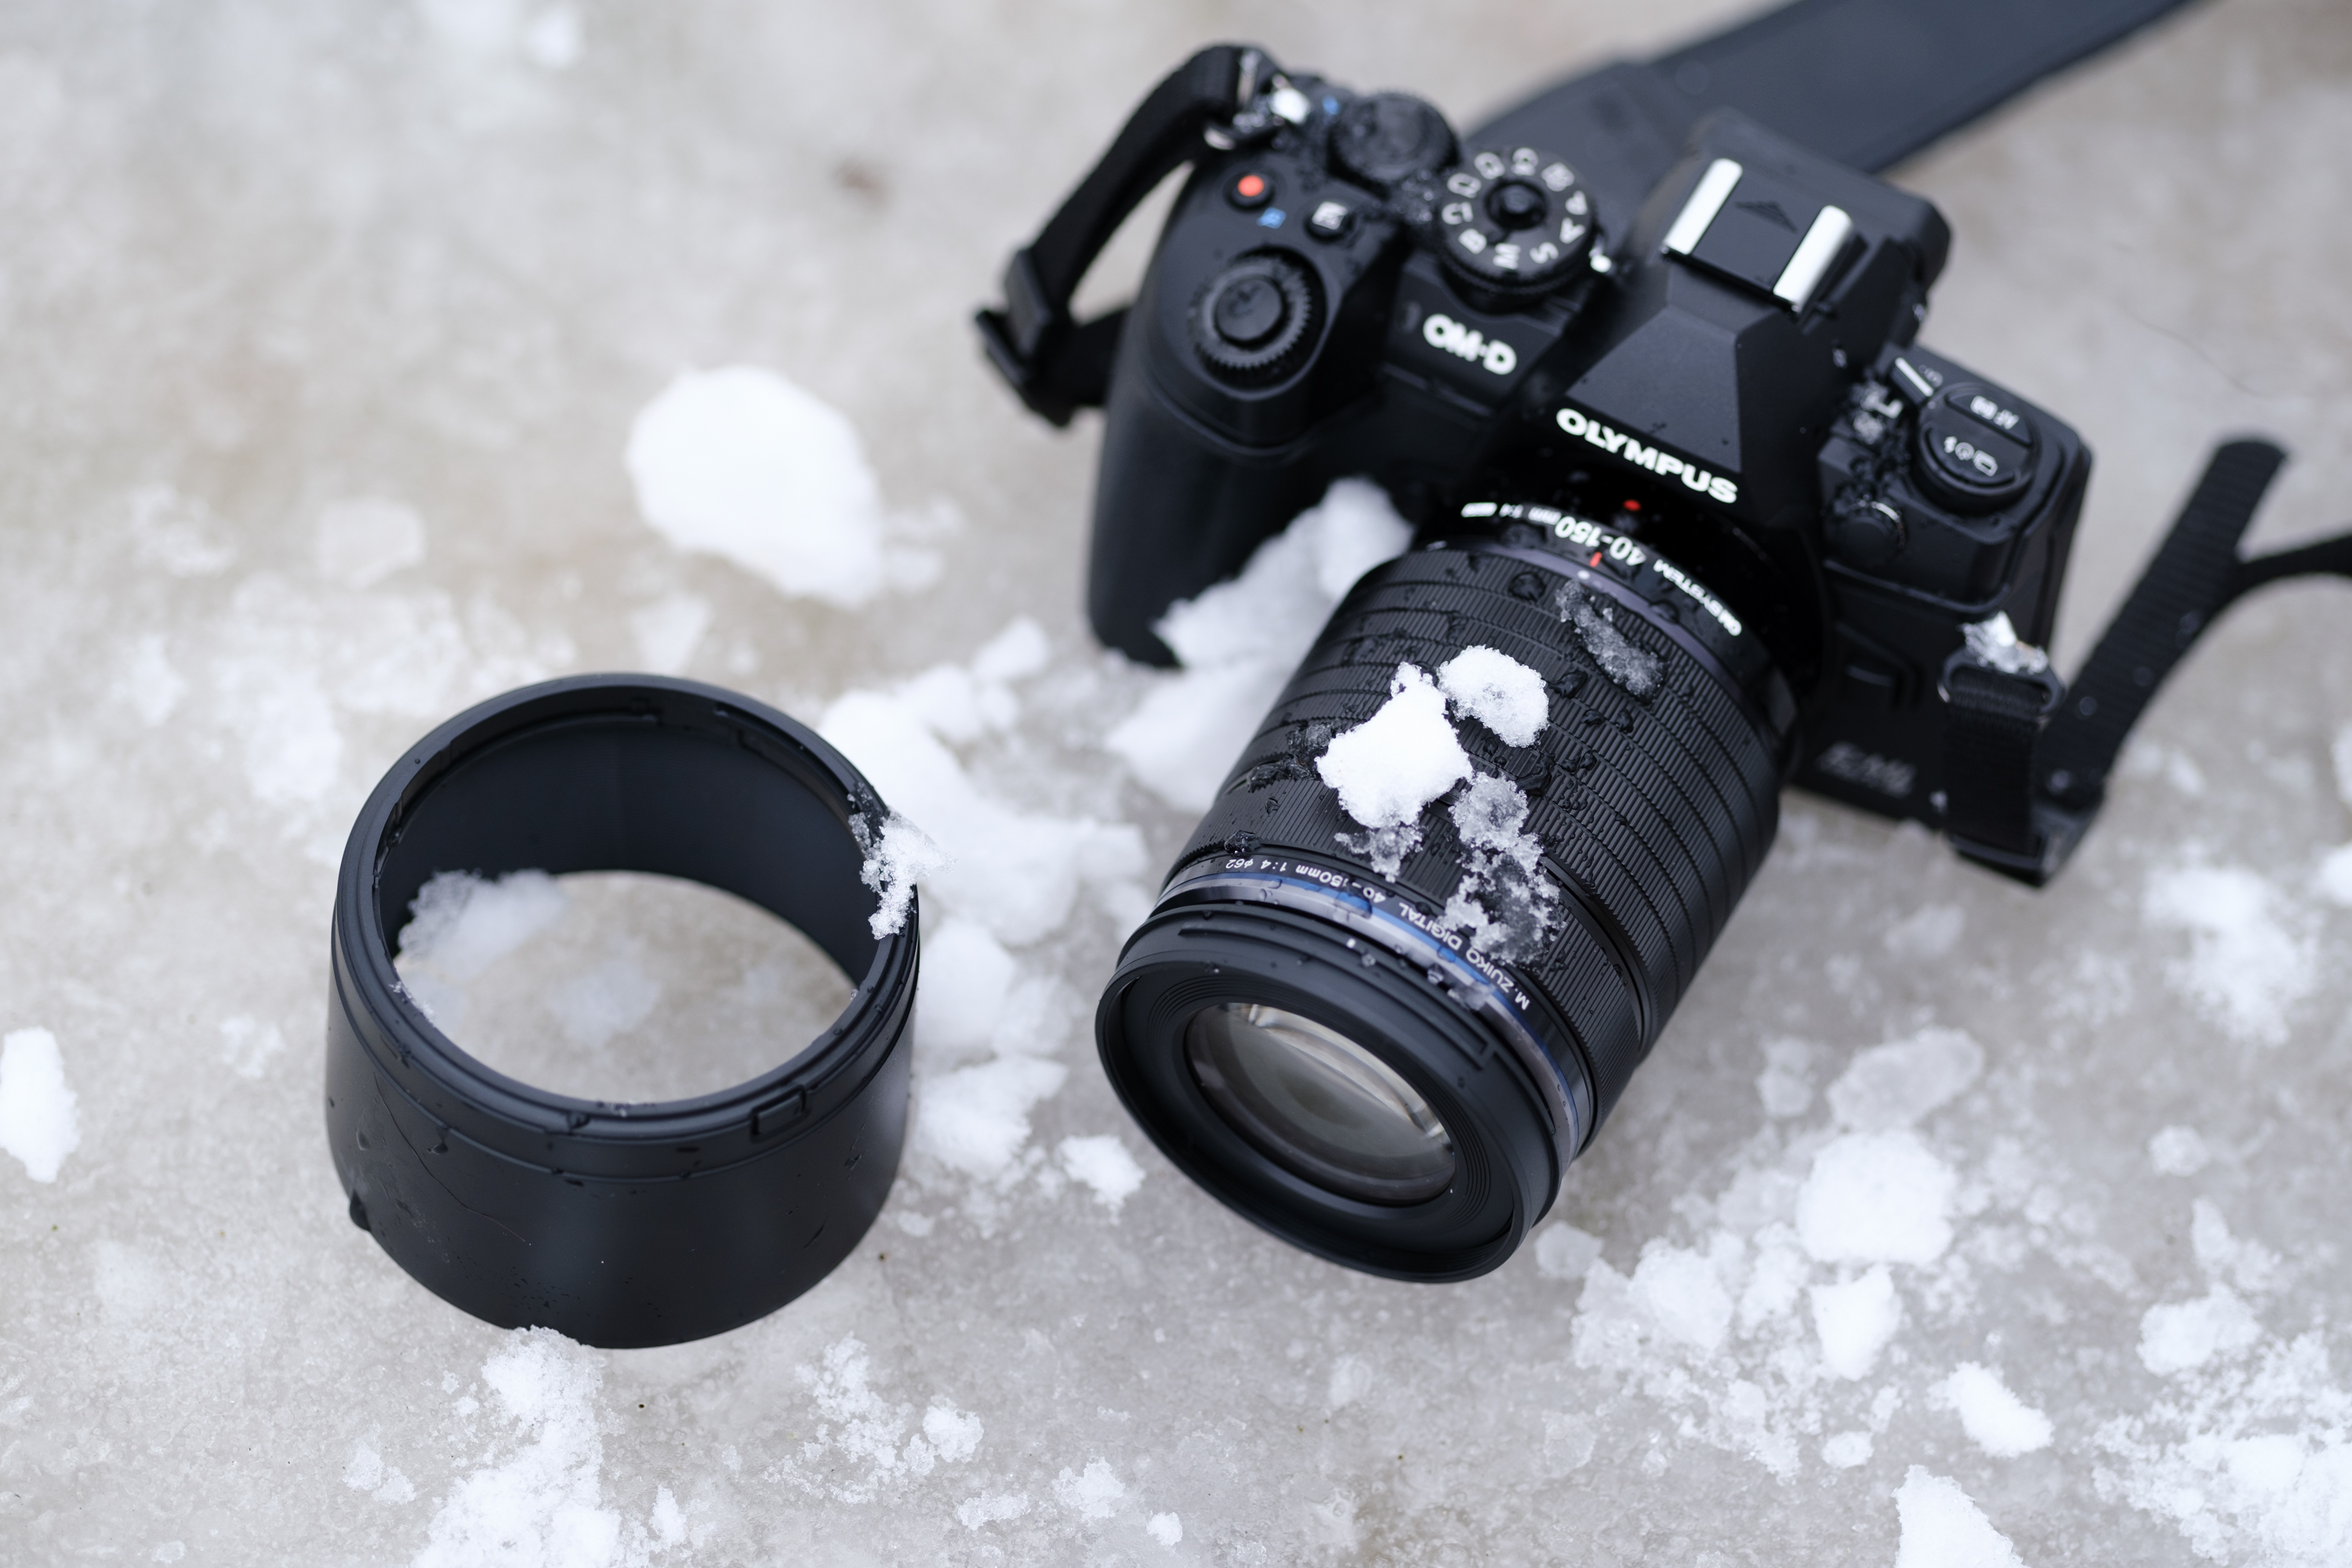 Small Yet Sturdy: OM System 40-150mm F4 Pro Review